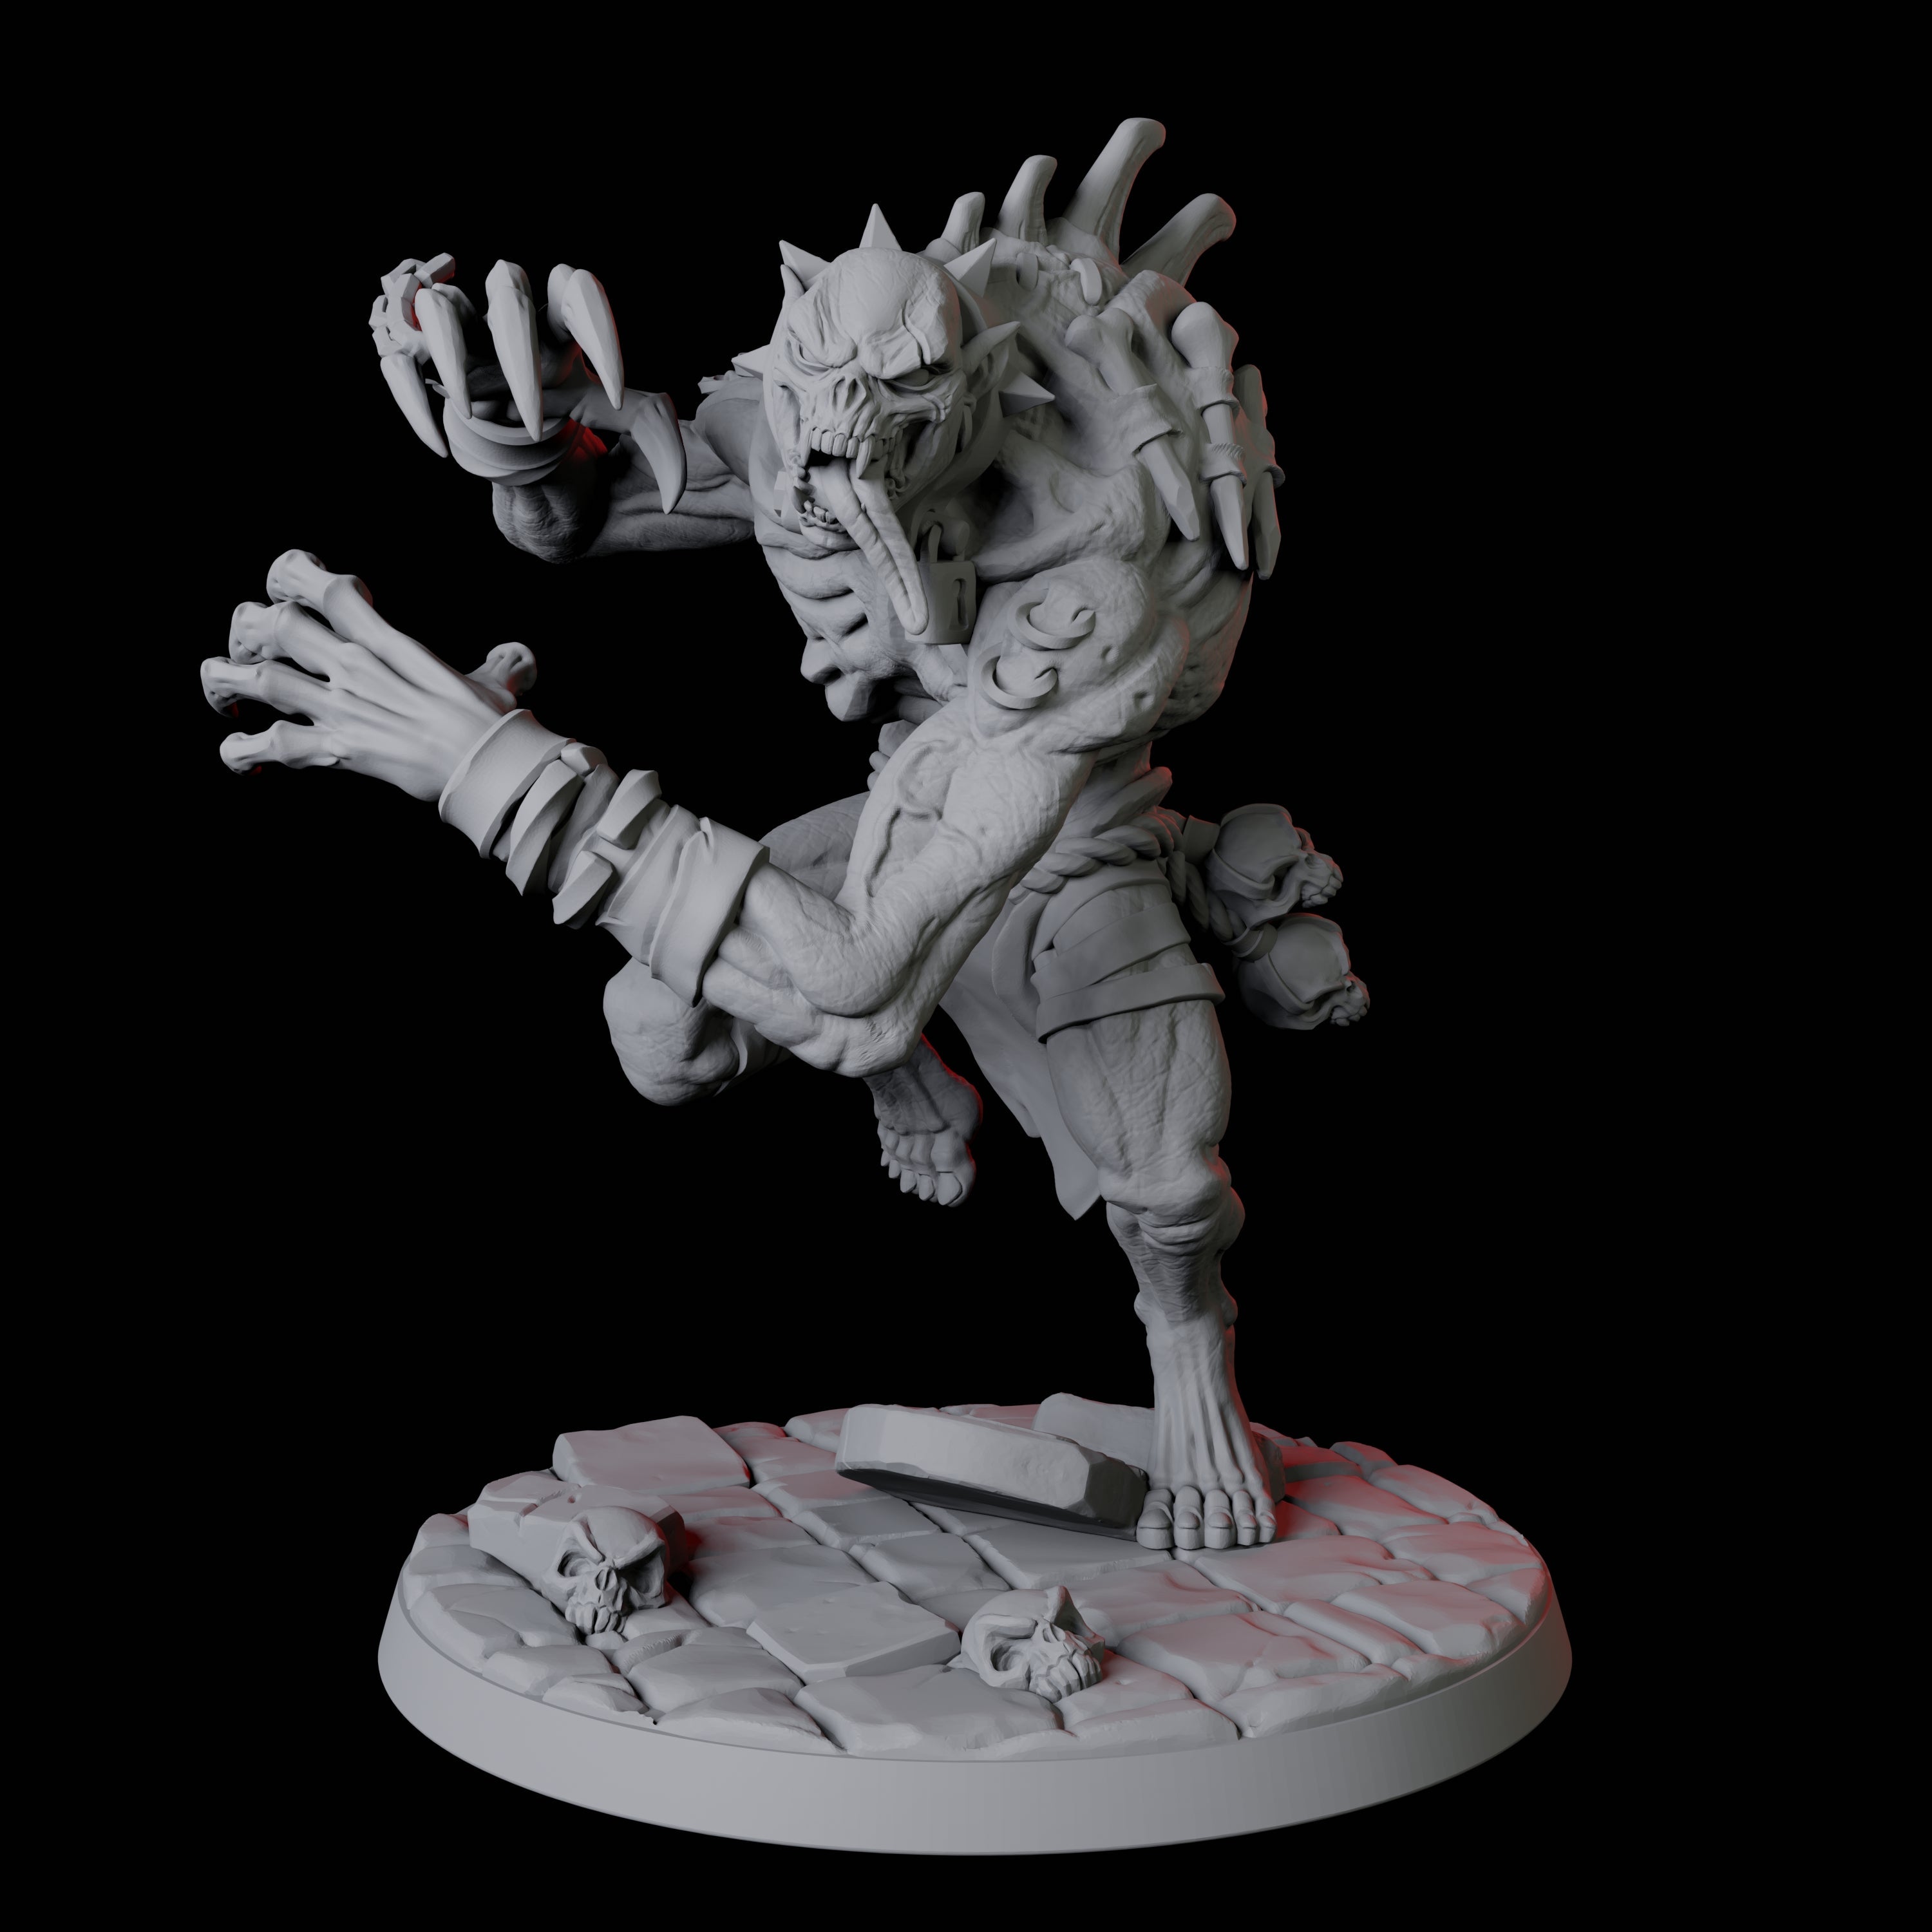 Roaming Ghast A Miniature for Dungeons and Dragons, Pathfinder or other TTRPGs